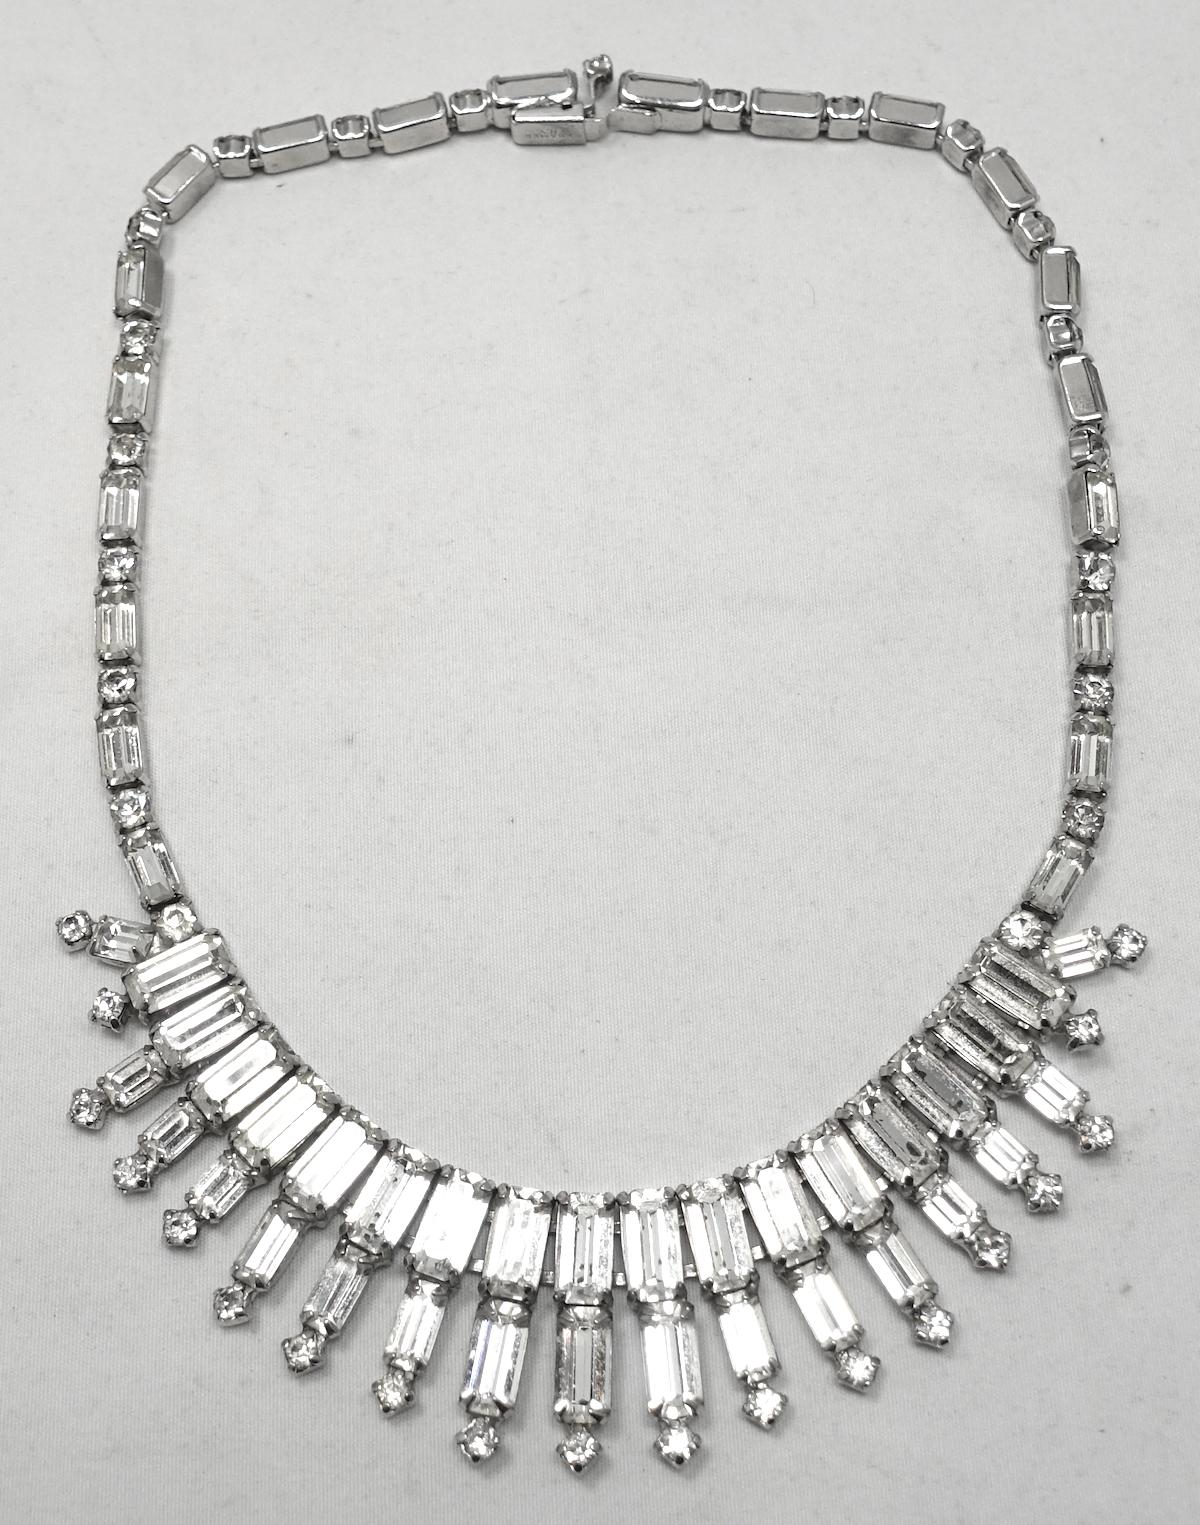 This vintage signed Kramer necklace has clear crystals in a rhodium silver tone setting.  In excellent condition and signed “Kramer”, this necklace measures 15” with a slide in clasp x 1” at front/center.